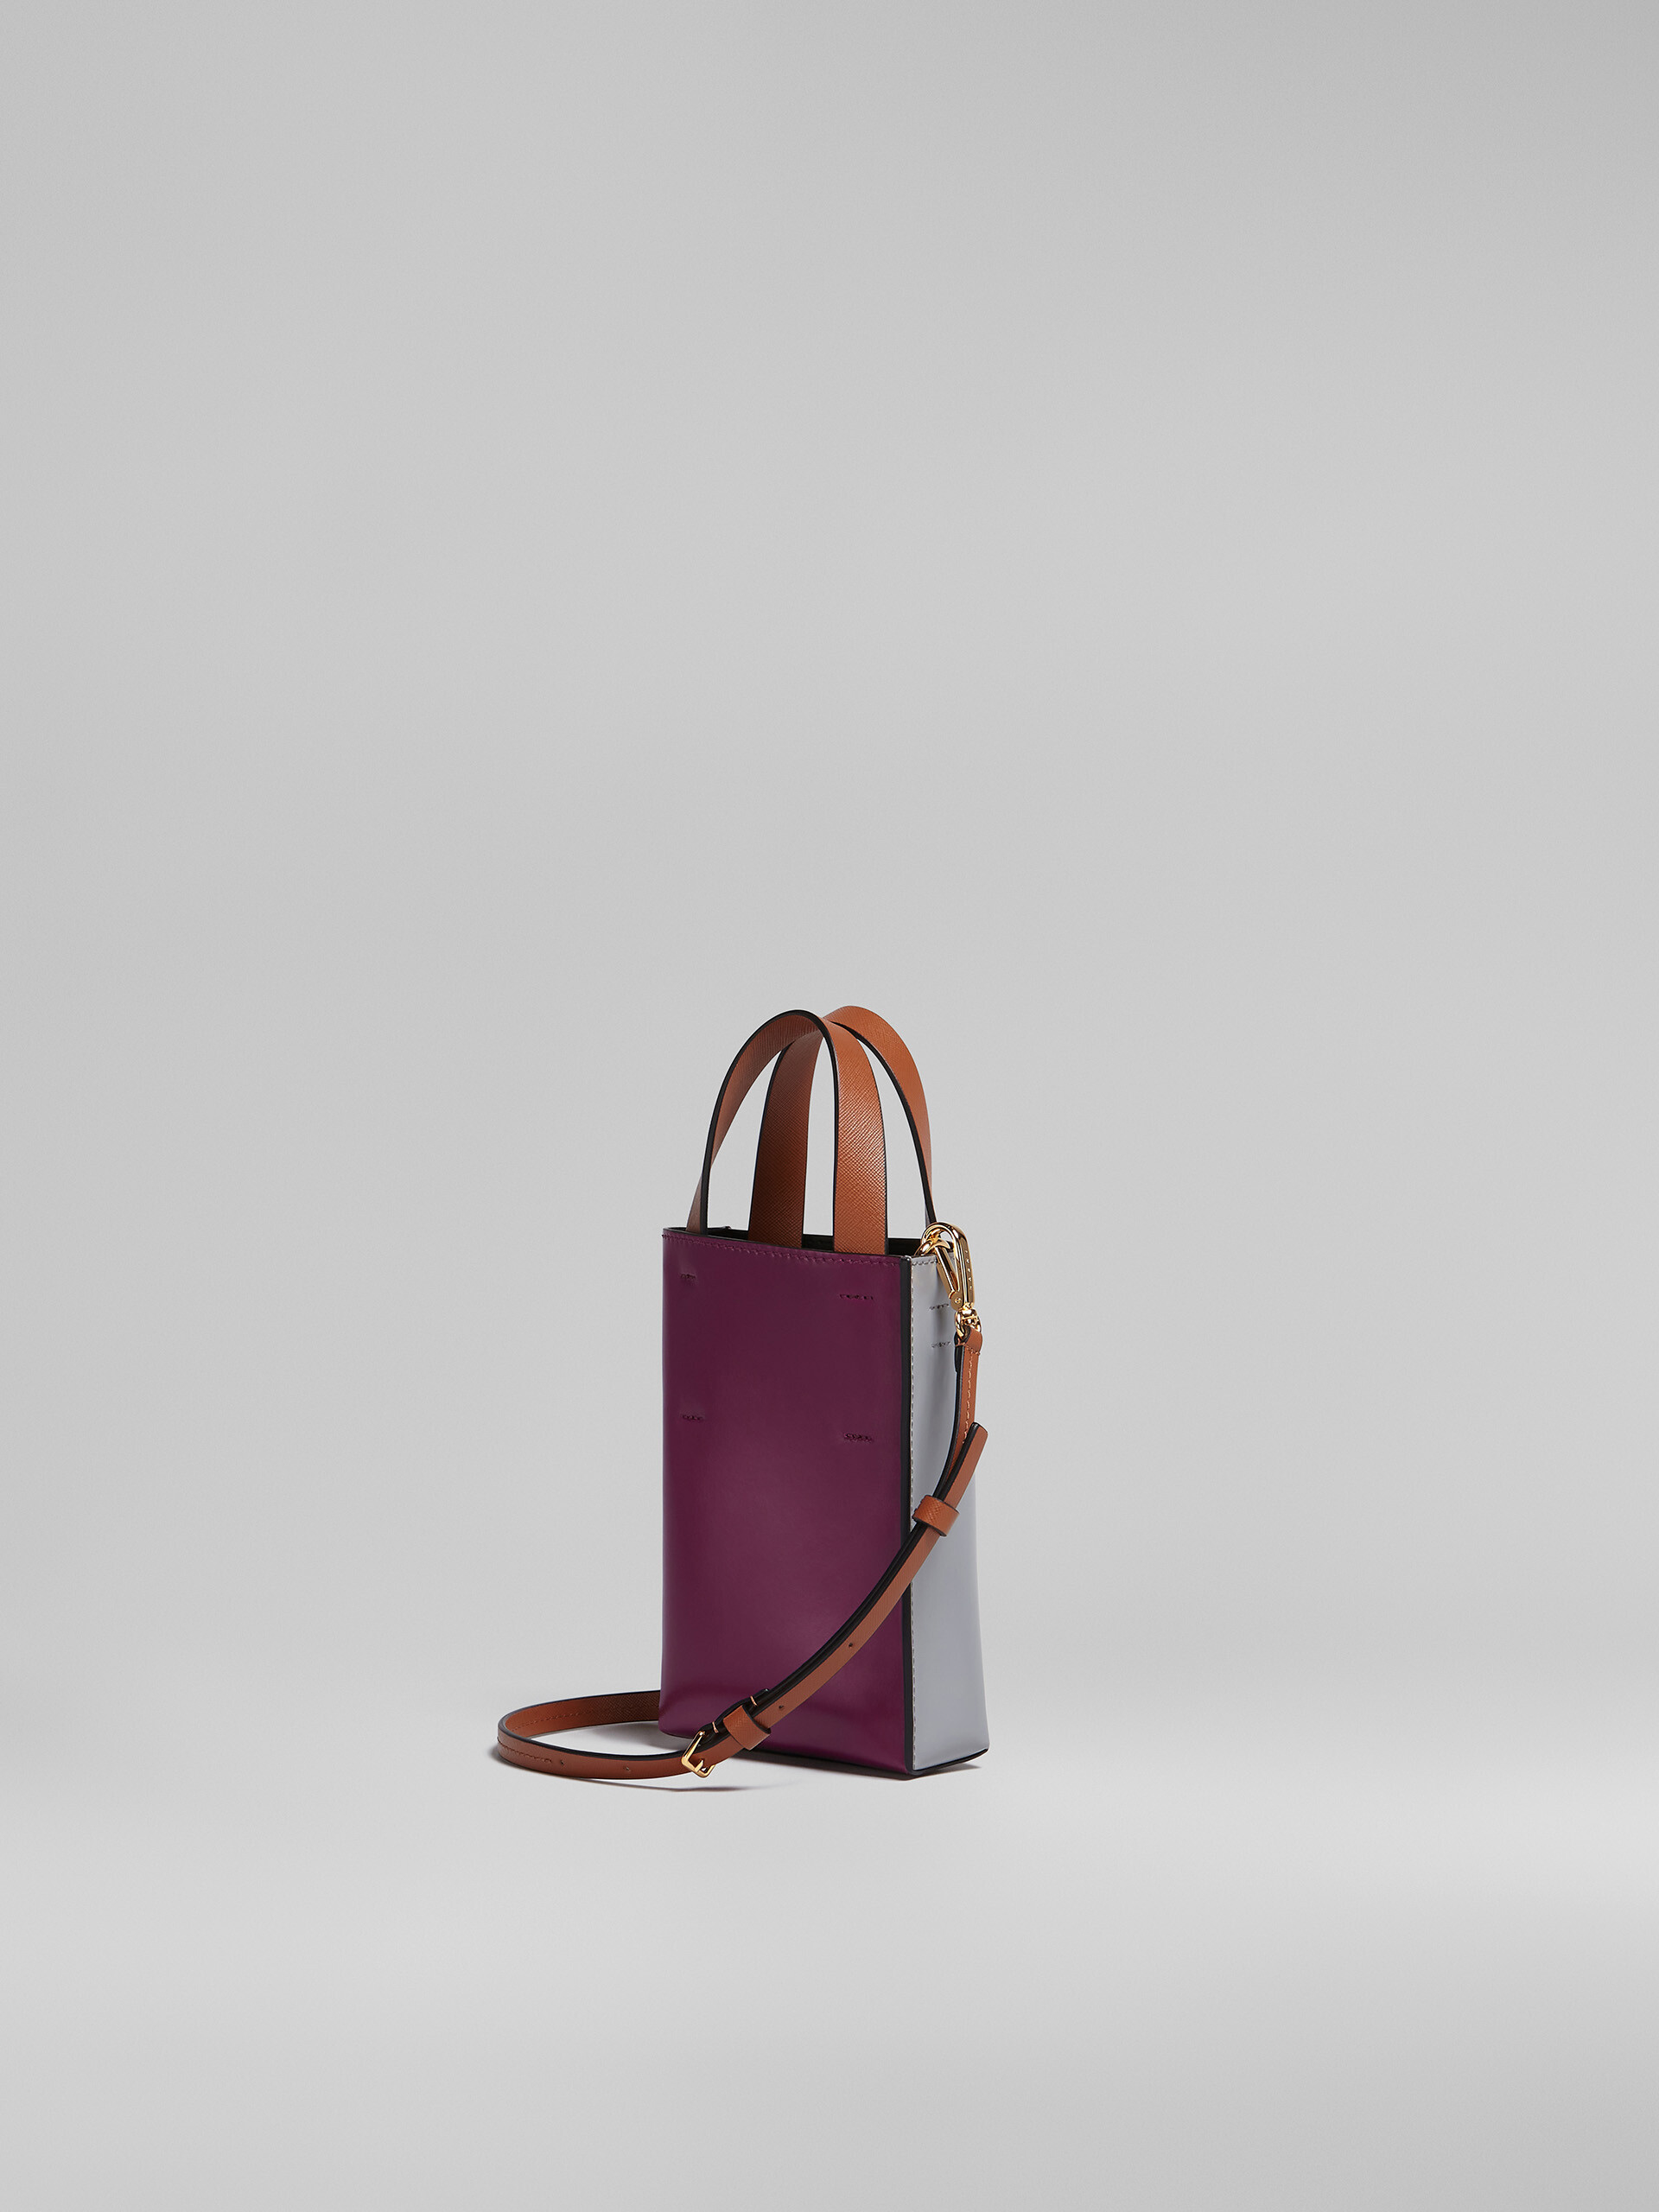 MUSEO nano bag in grey and purple leather - Shopping Bags - Image 3